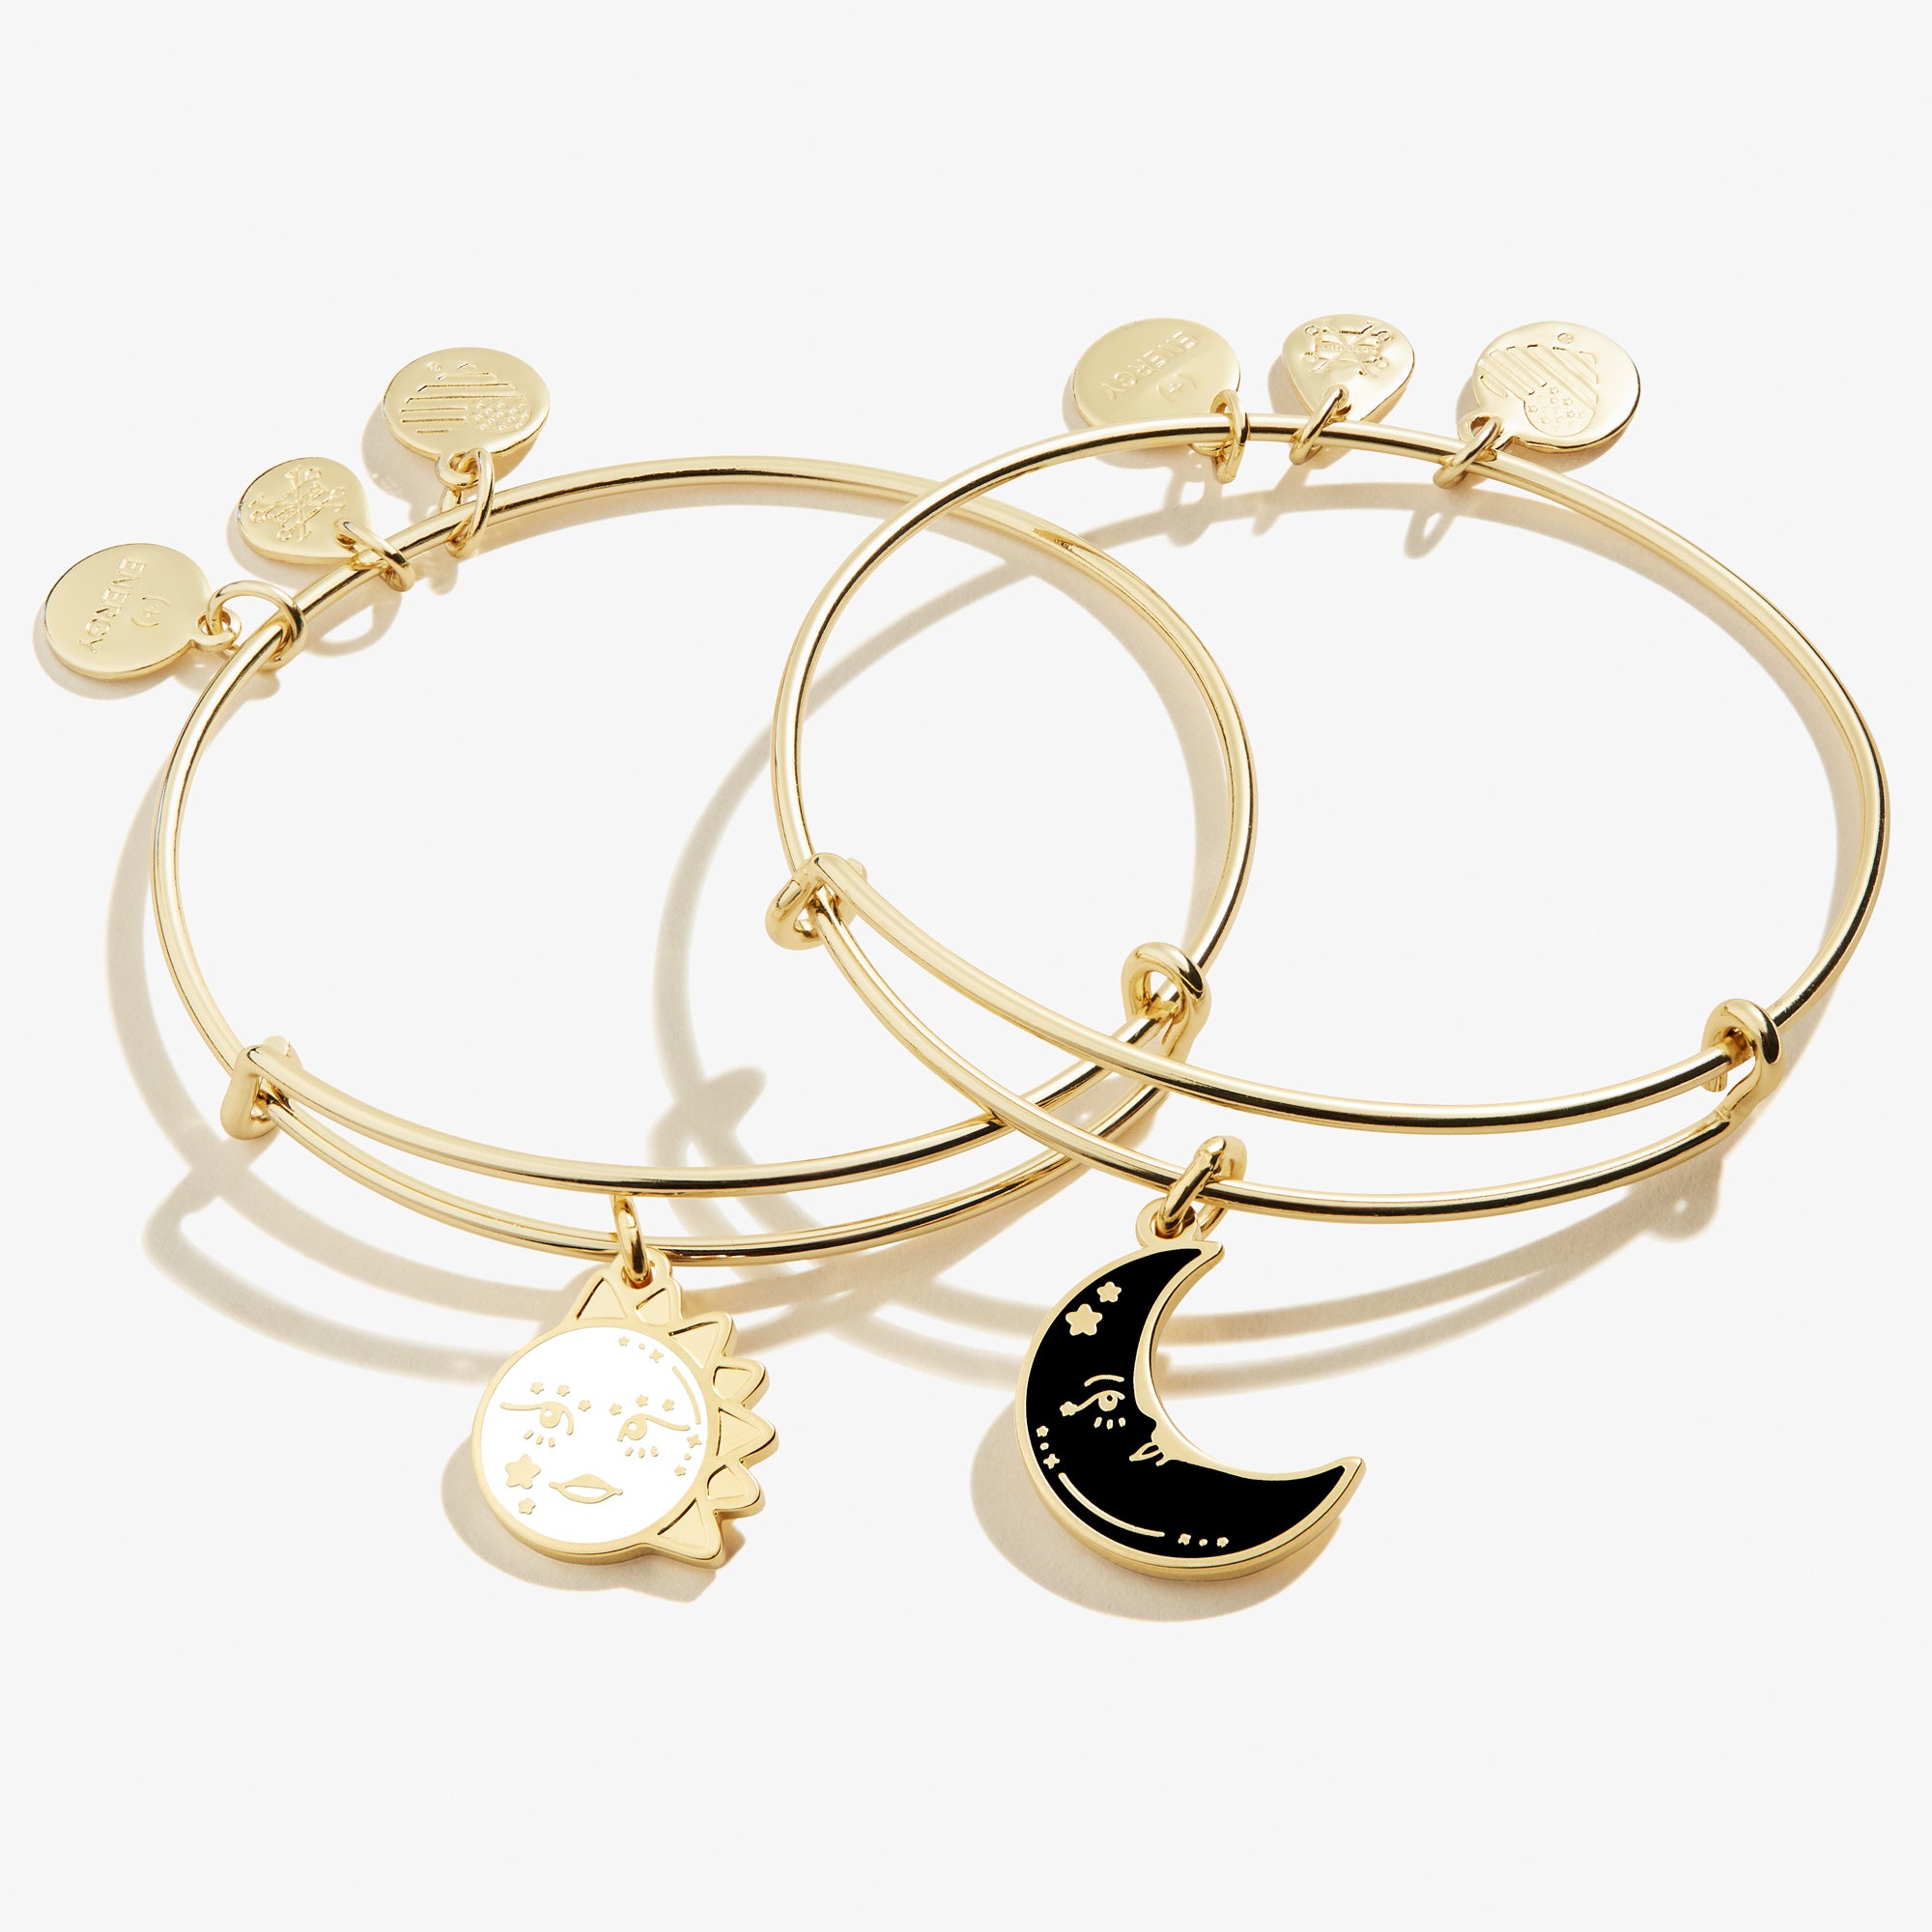 Expandable Best Friends Set of 2 Alex and ANI Charity by Design